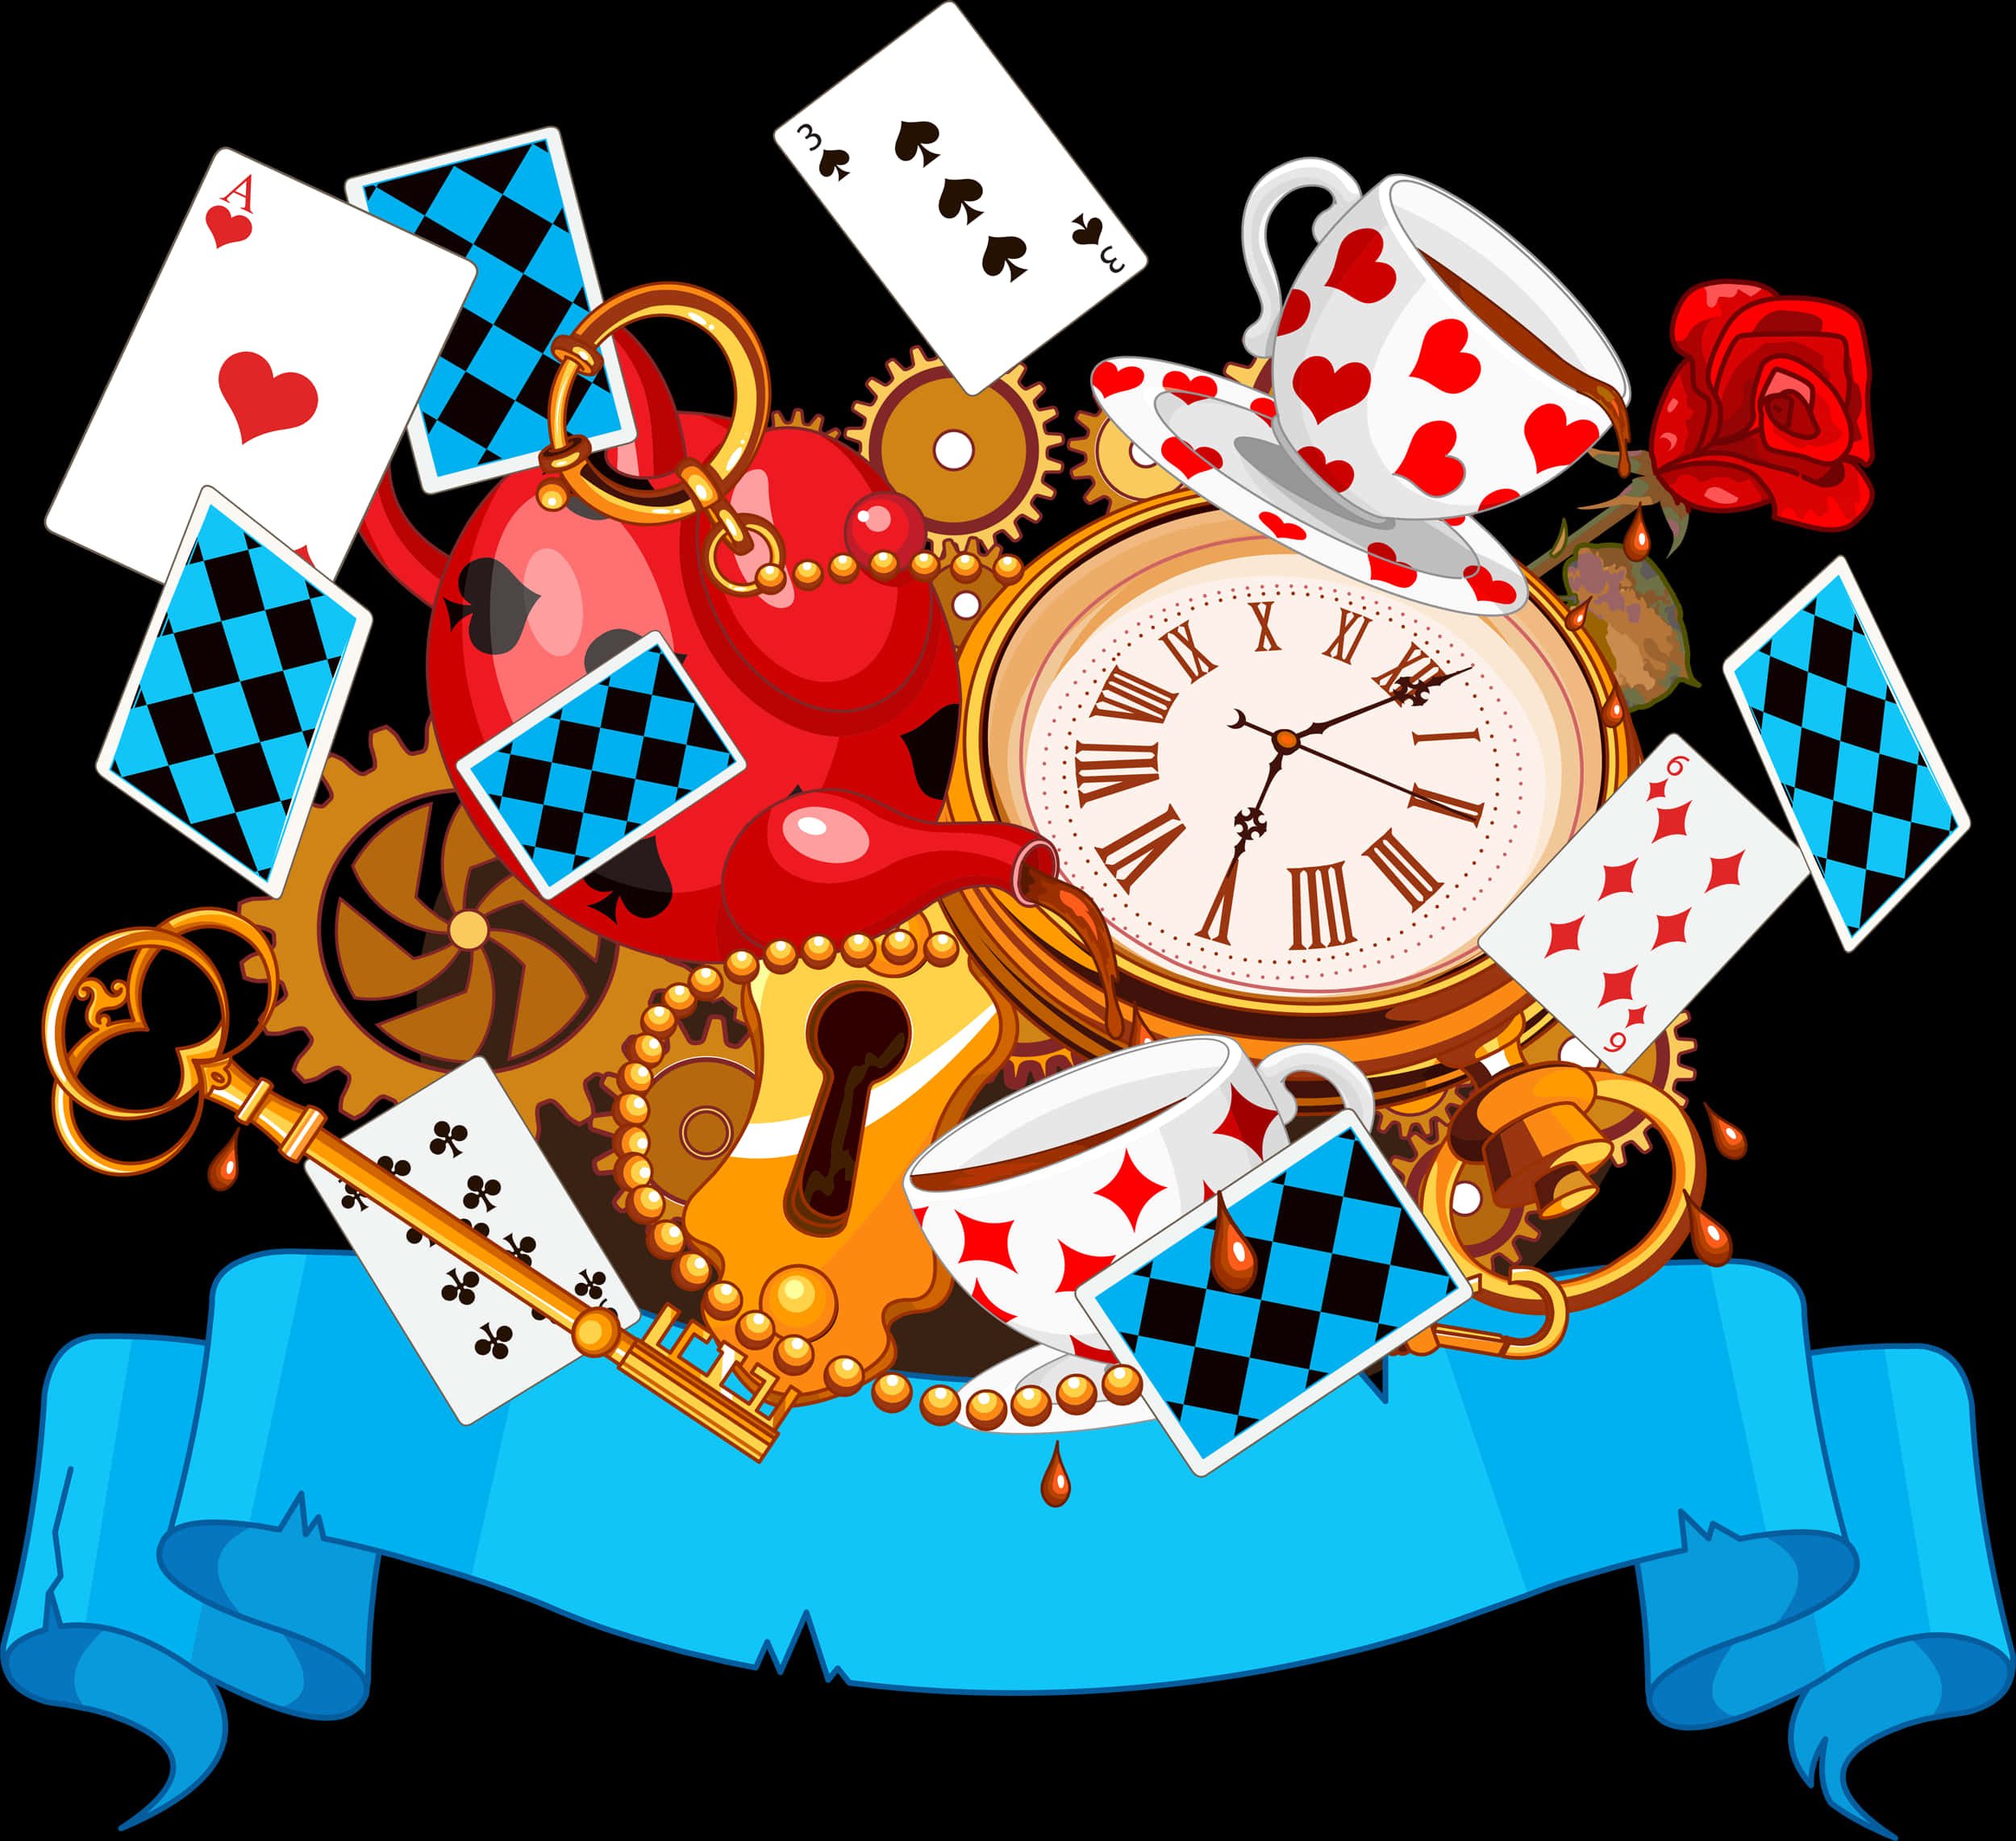 A Clock And Teapots With Cards And Keys